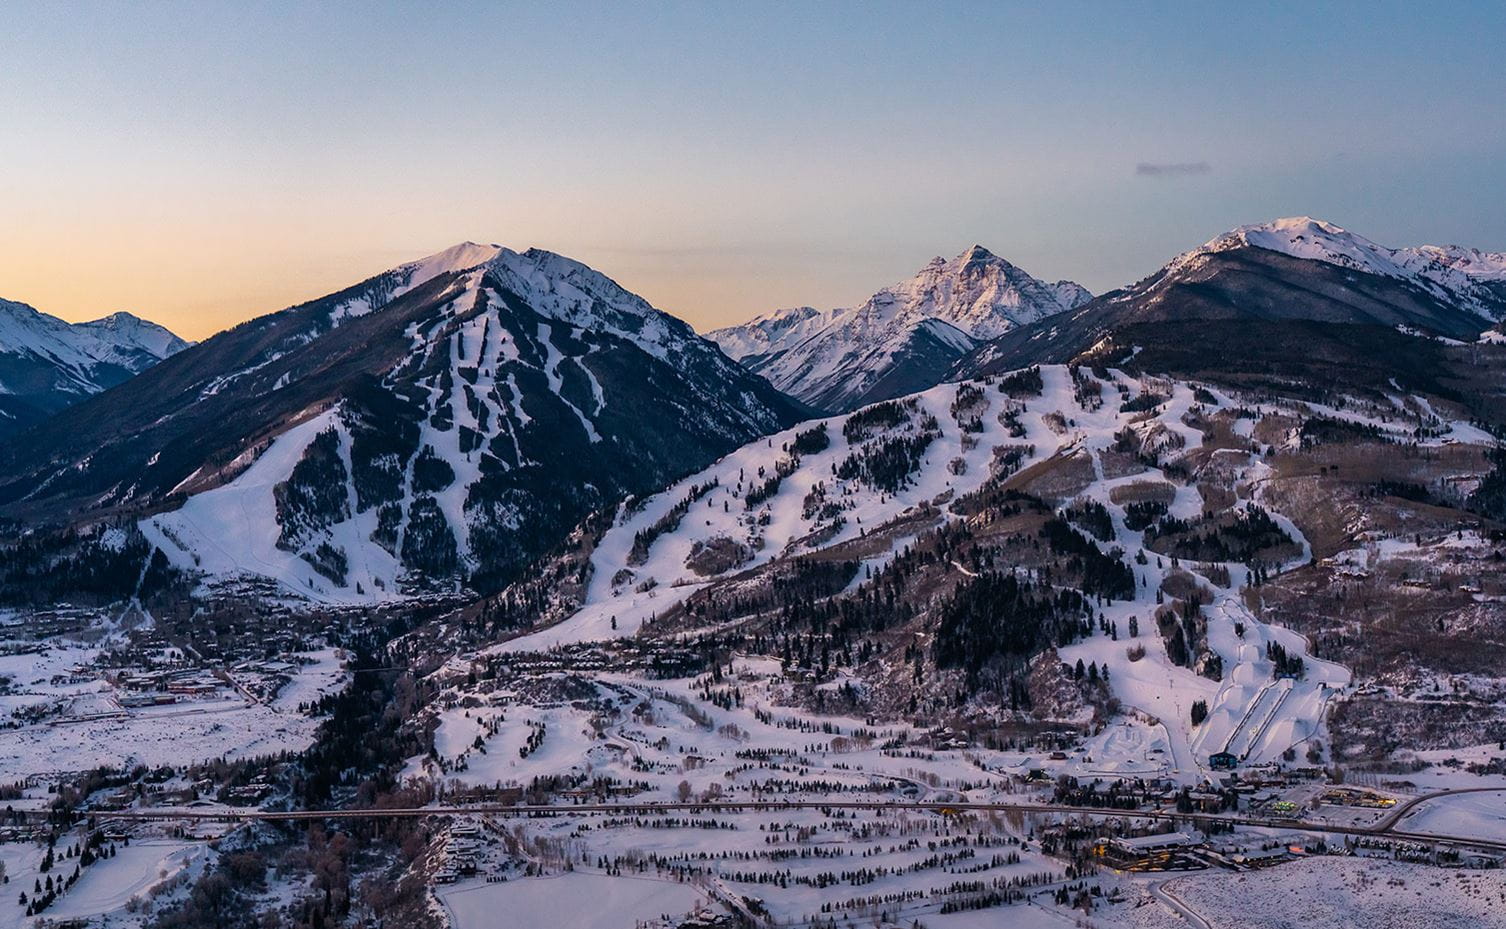 A view at dawn of Aspen Highlands, Pyramid Peak and Buttermilk